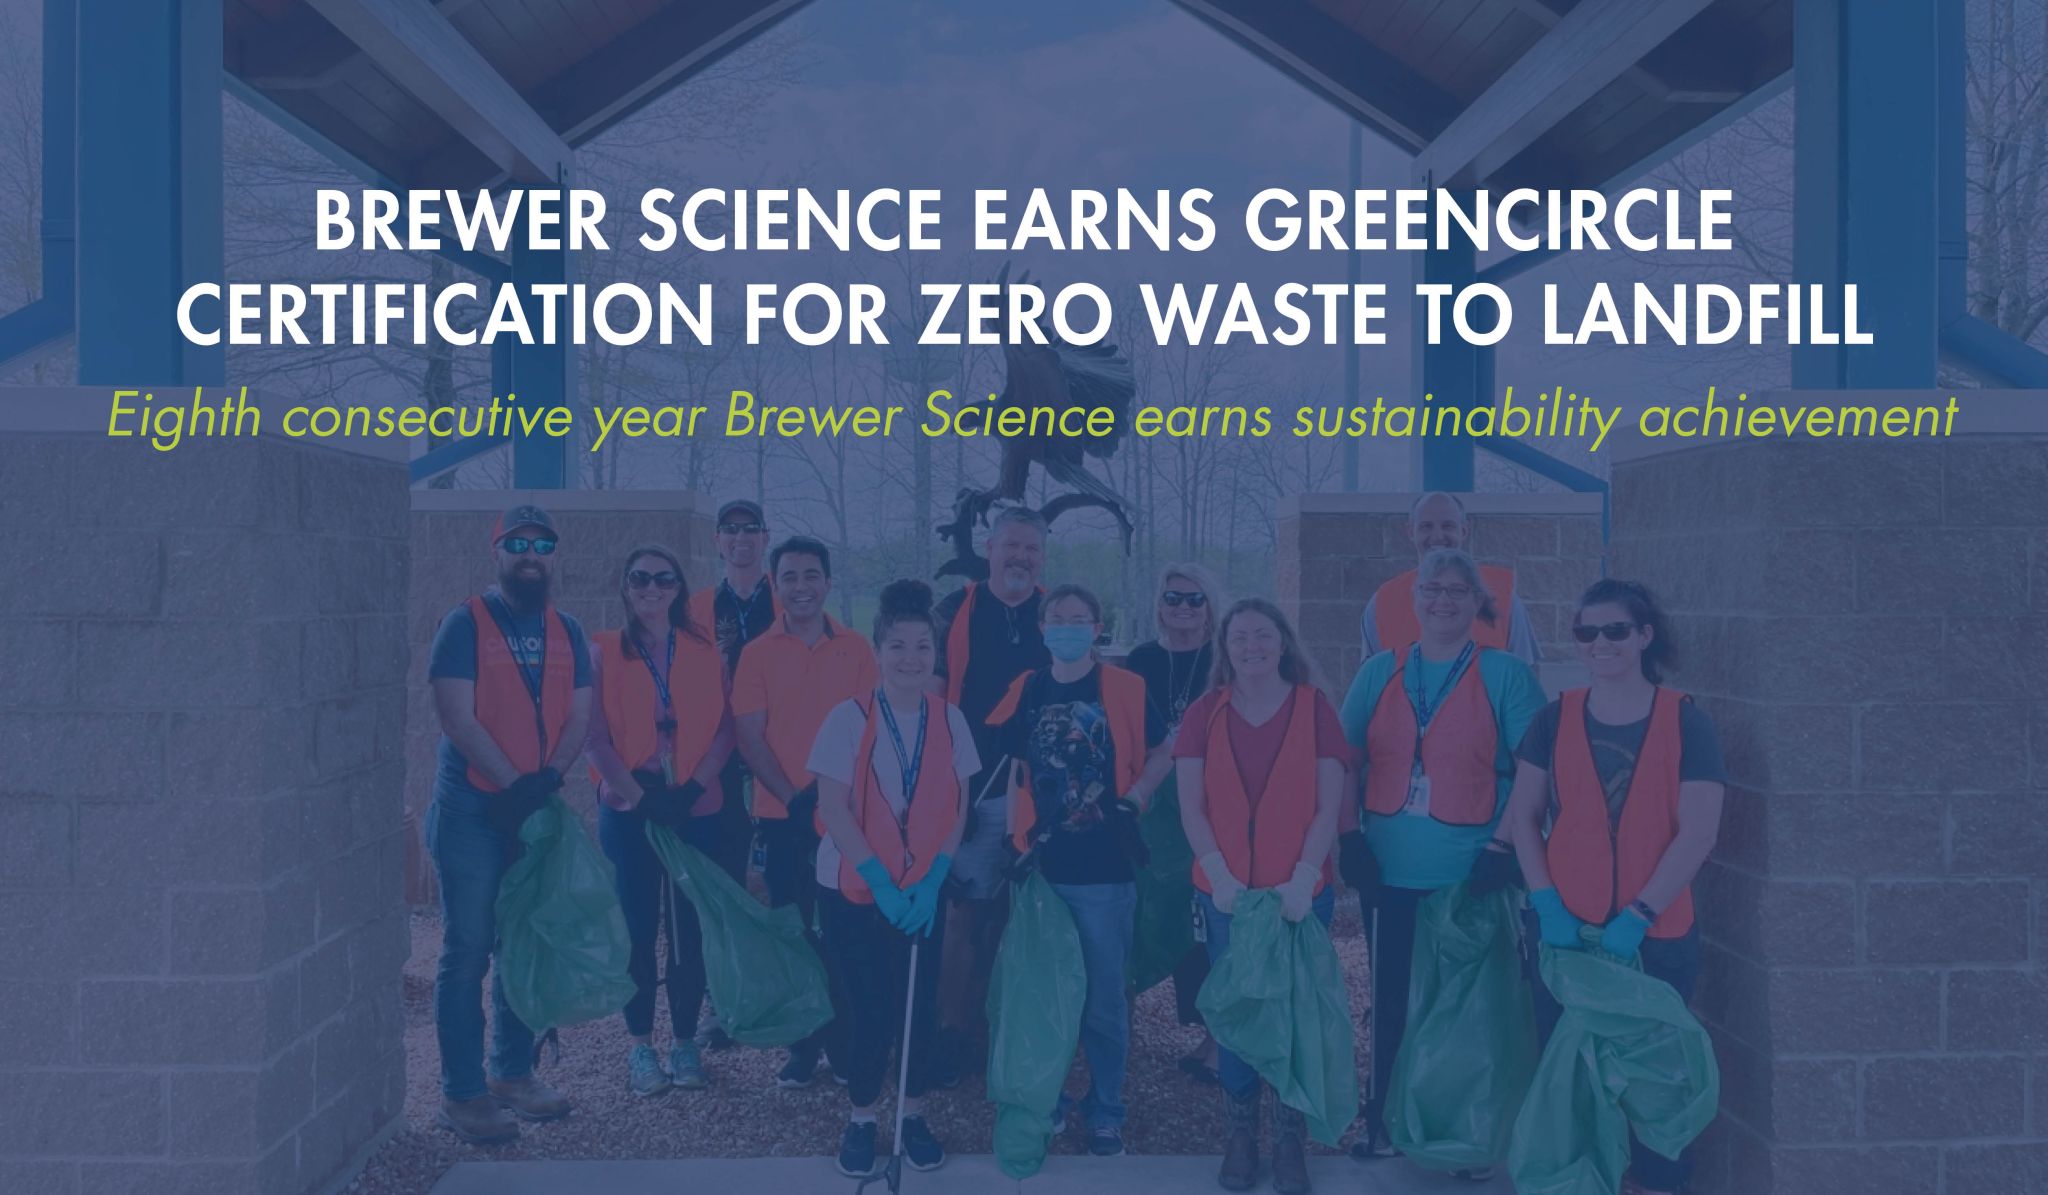 Brewer Science Earns GreenCircle Certification for Zero Waste to Landfill for Eighth Consecutive Year 